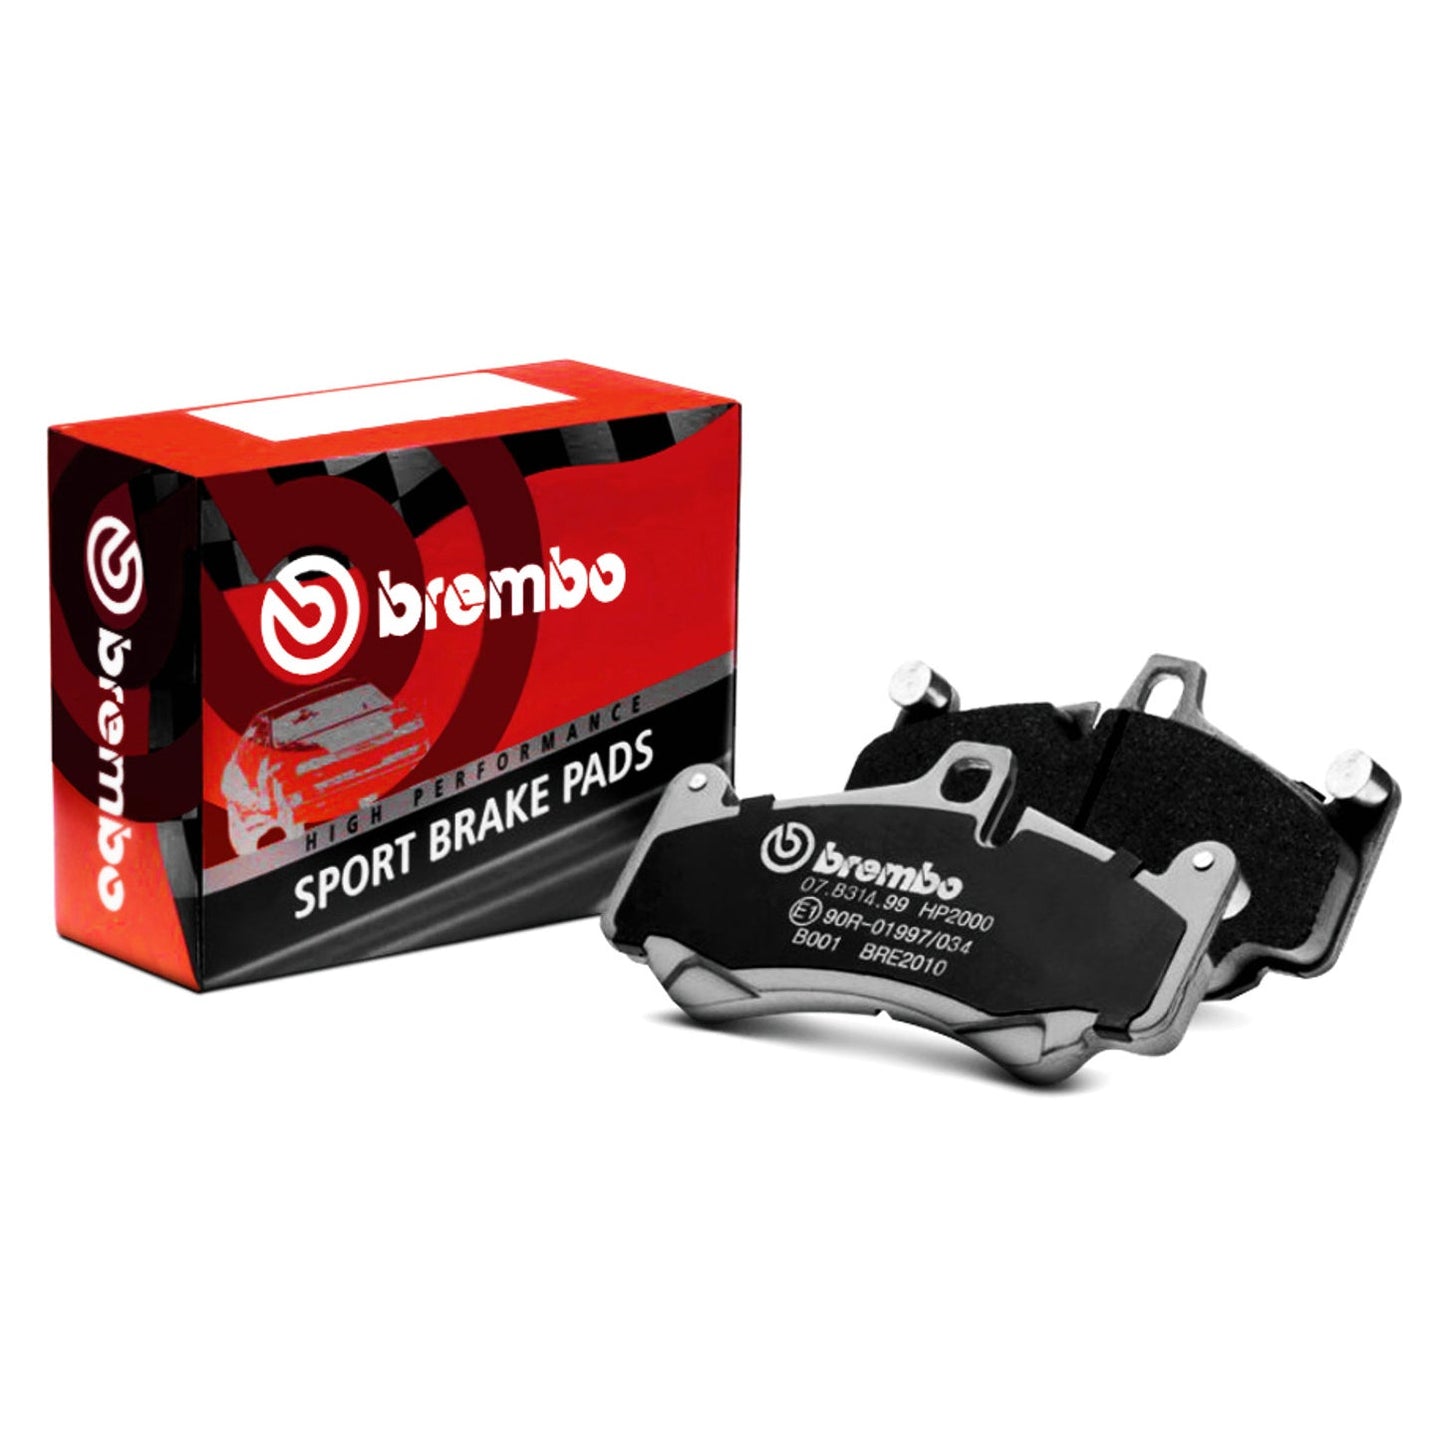 Brembo Sport HP2000 Front Brake Pads for Toyota Avensis Estate (T22) 2.0 150bhp (97-03)